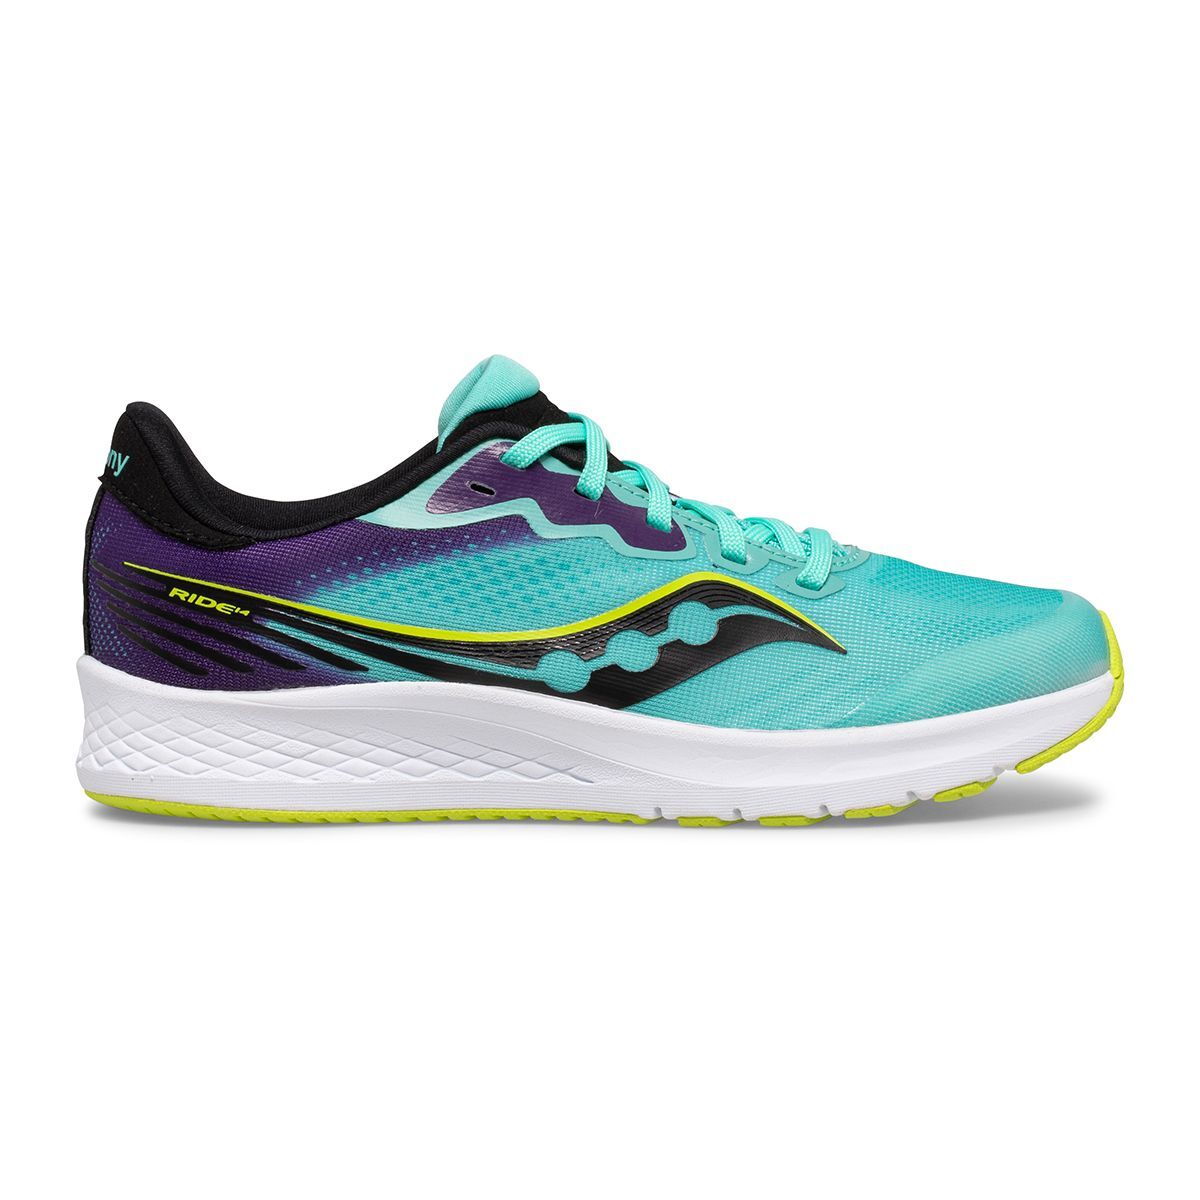 Saucony Ride 14 - Running shoes - Kids